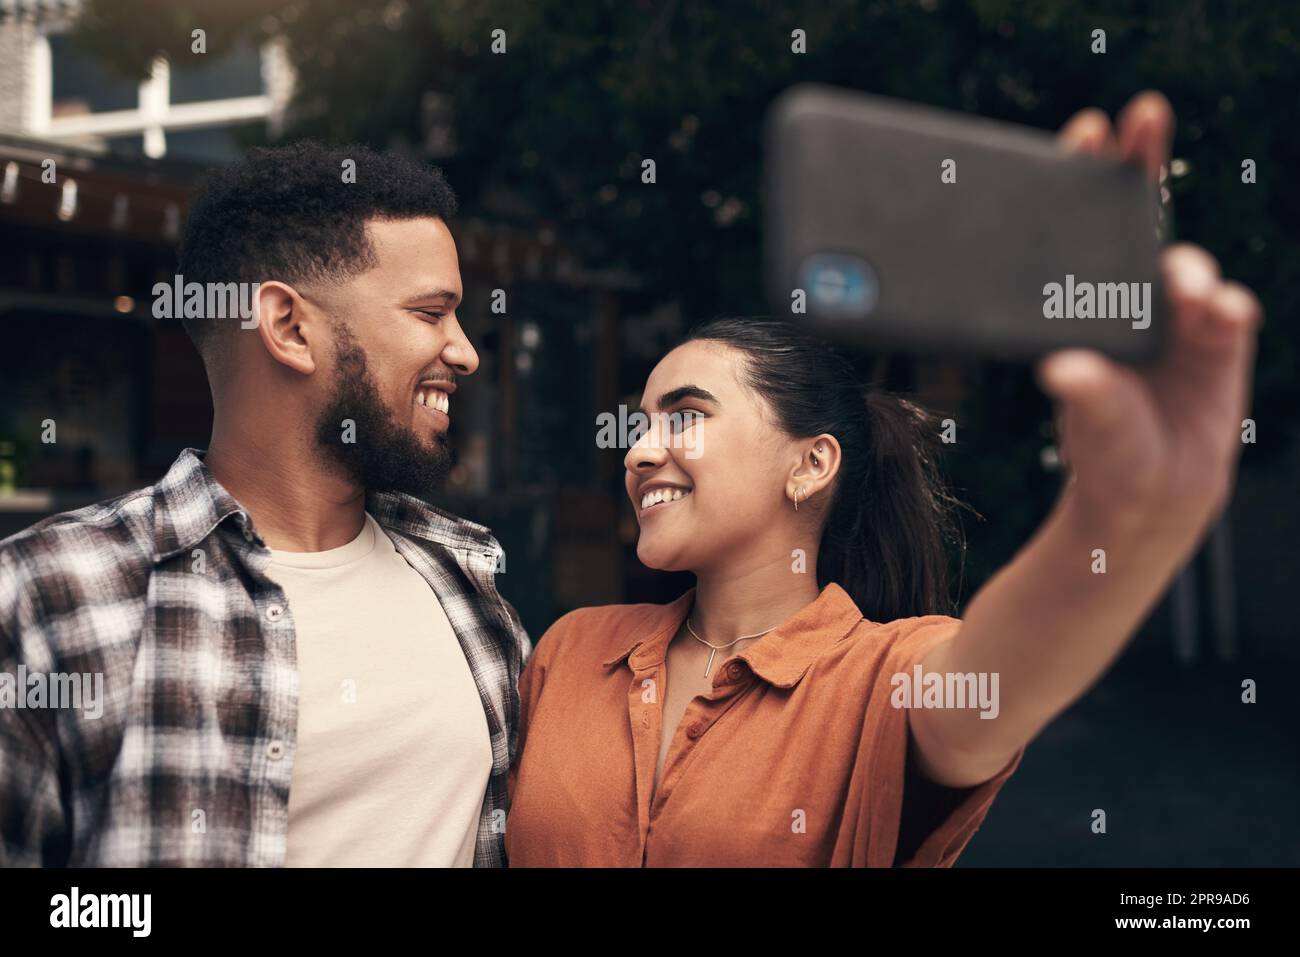 We have to capture the perfect day out. two young friends standing outside a restaurant and using a cellphone to take a selfie. Stock Photo